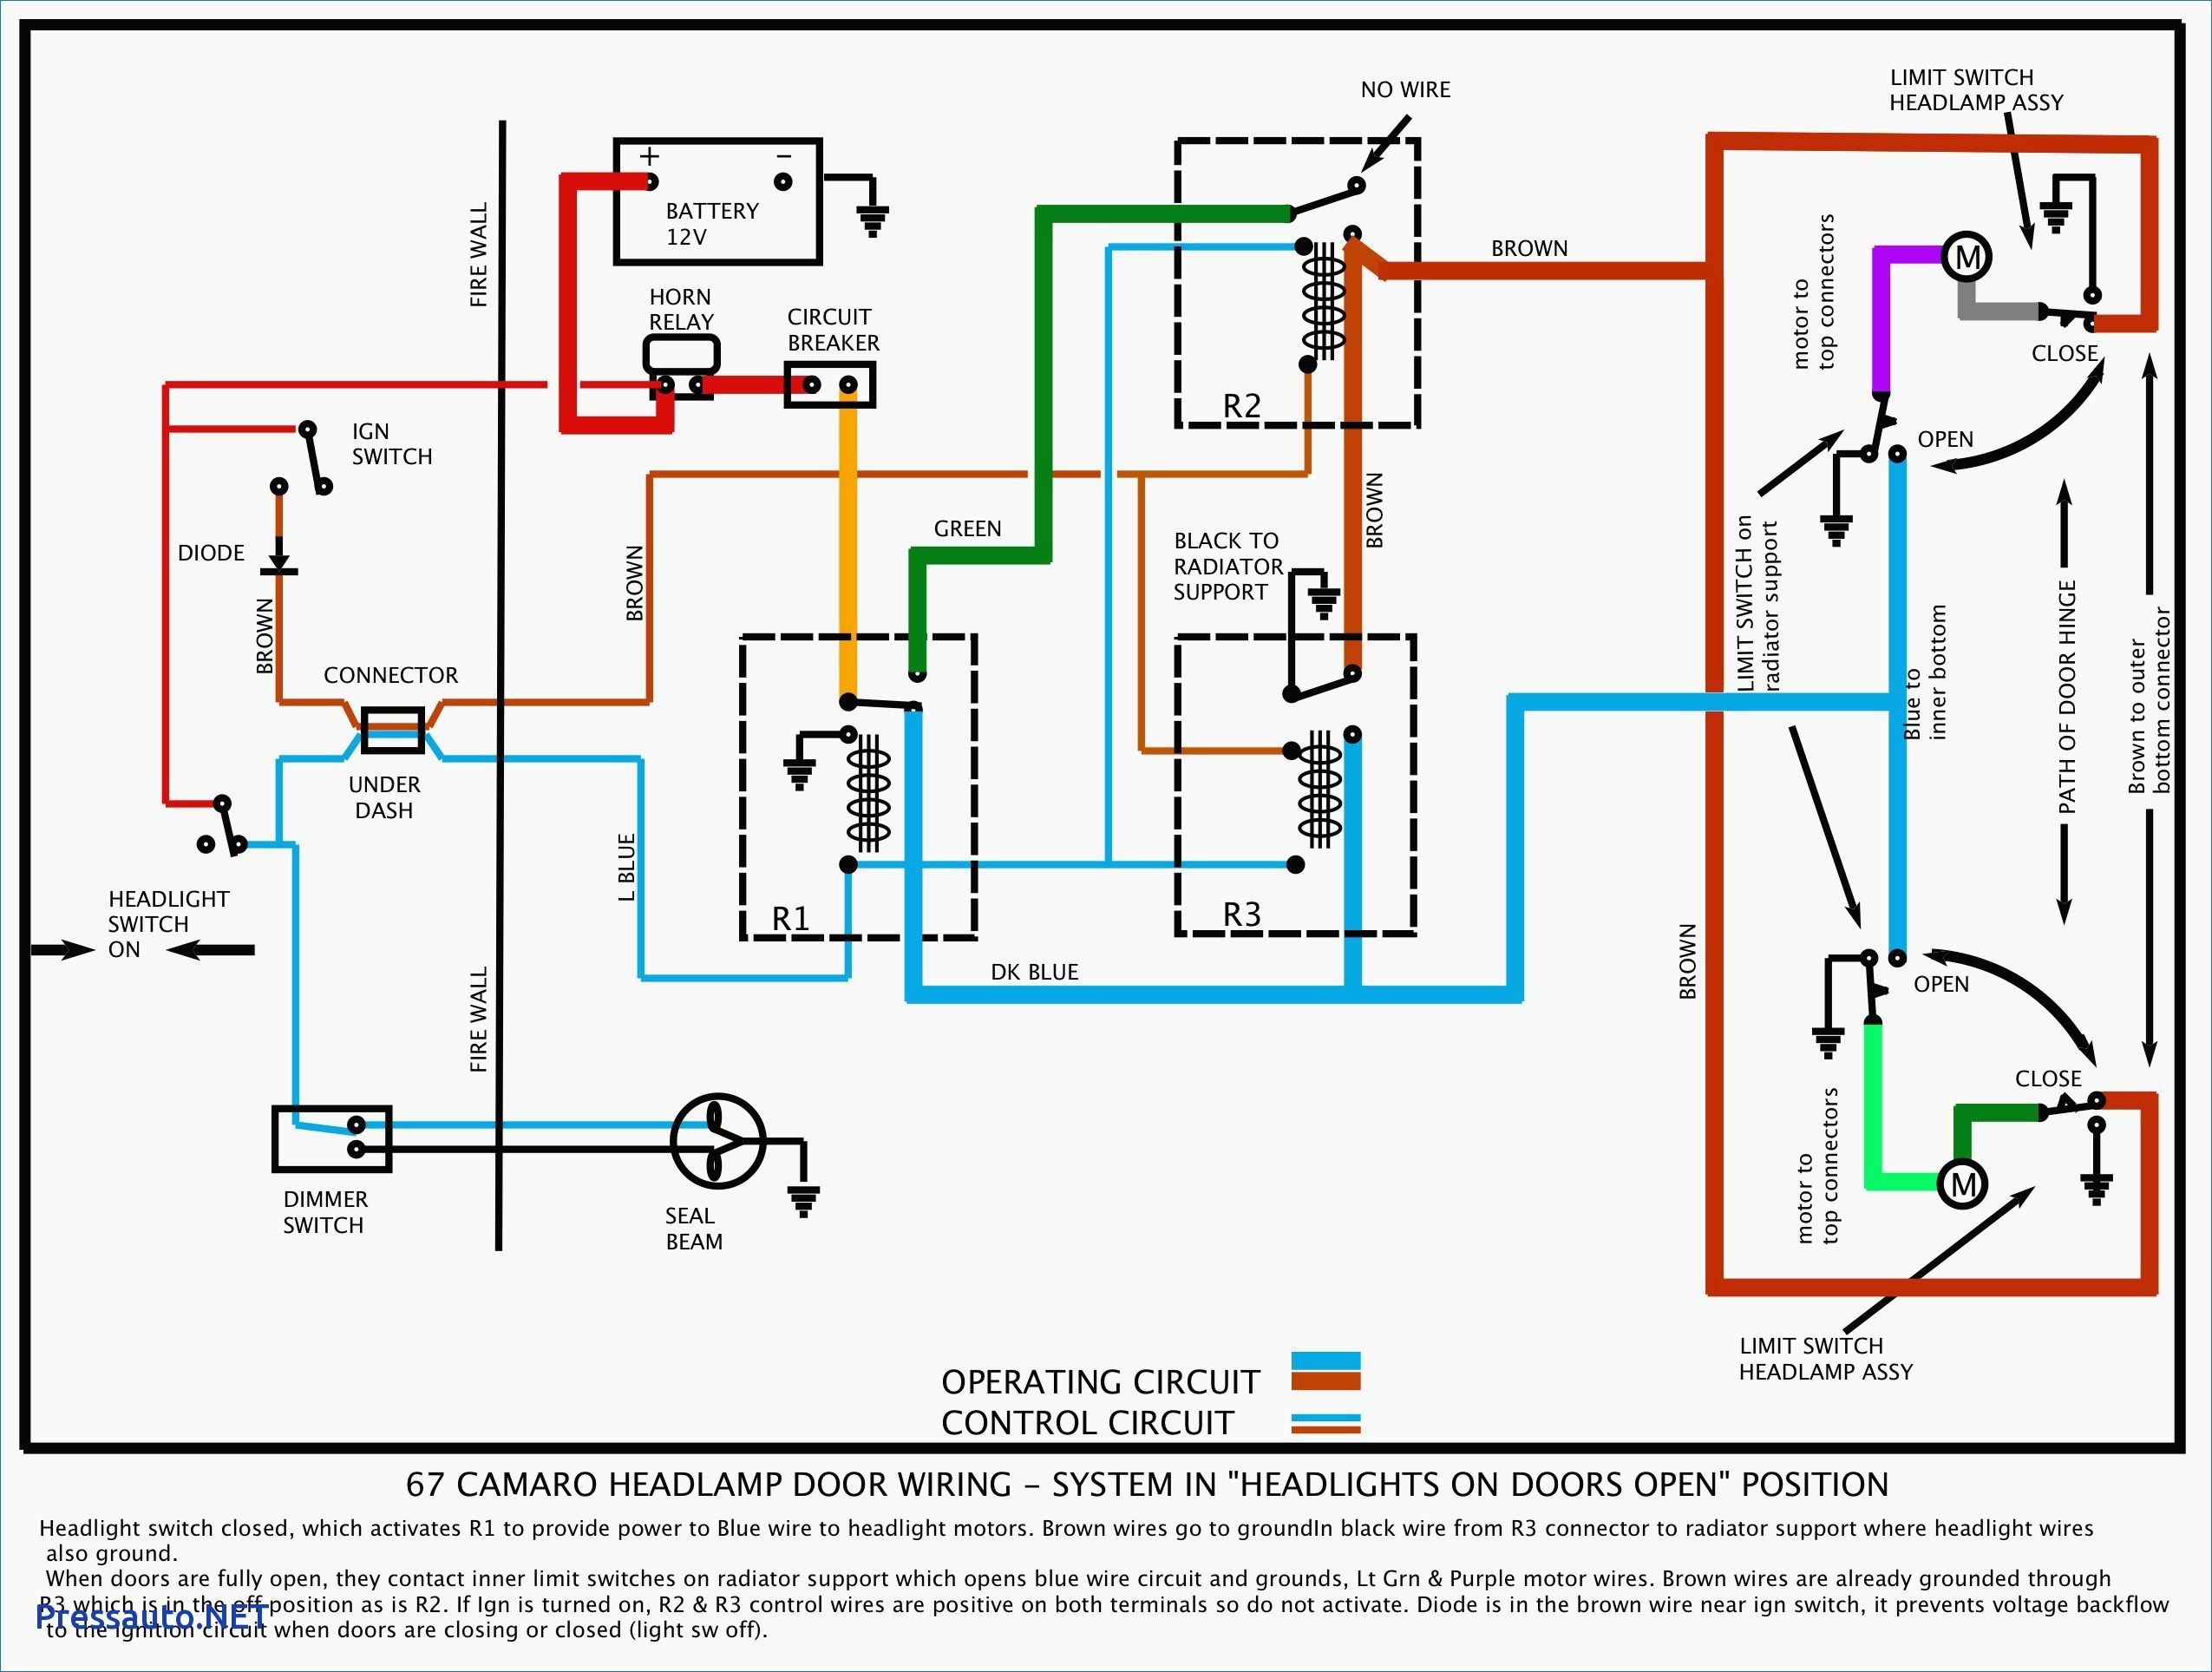 Headlight Dimmer Switch Wiring Download Free Pressauto Net Diagram Dimmer Switches Electrical 101 Readingrat Net 4